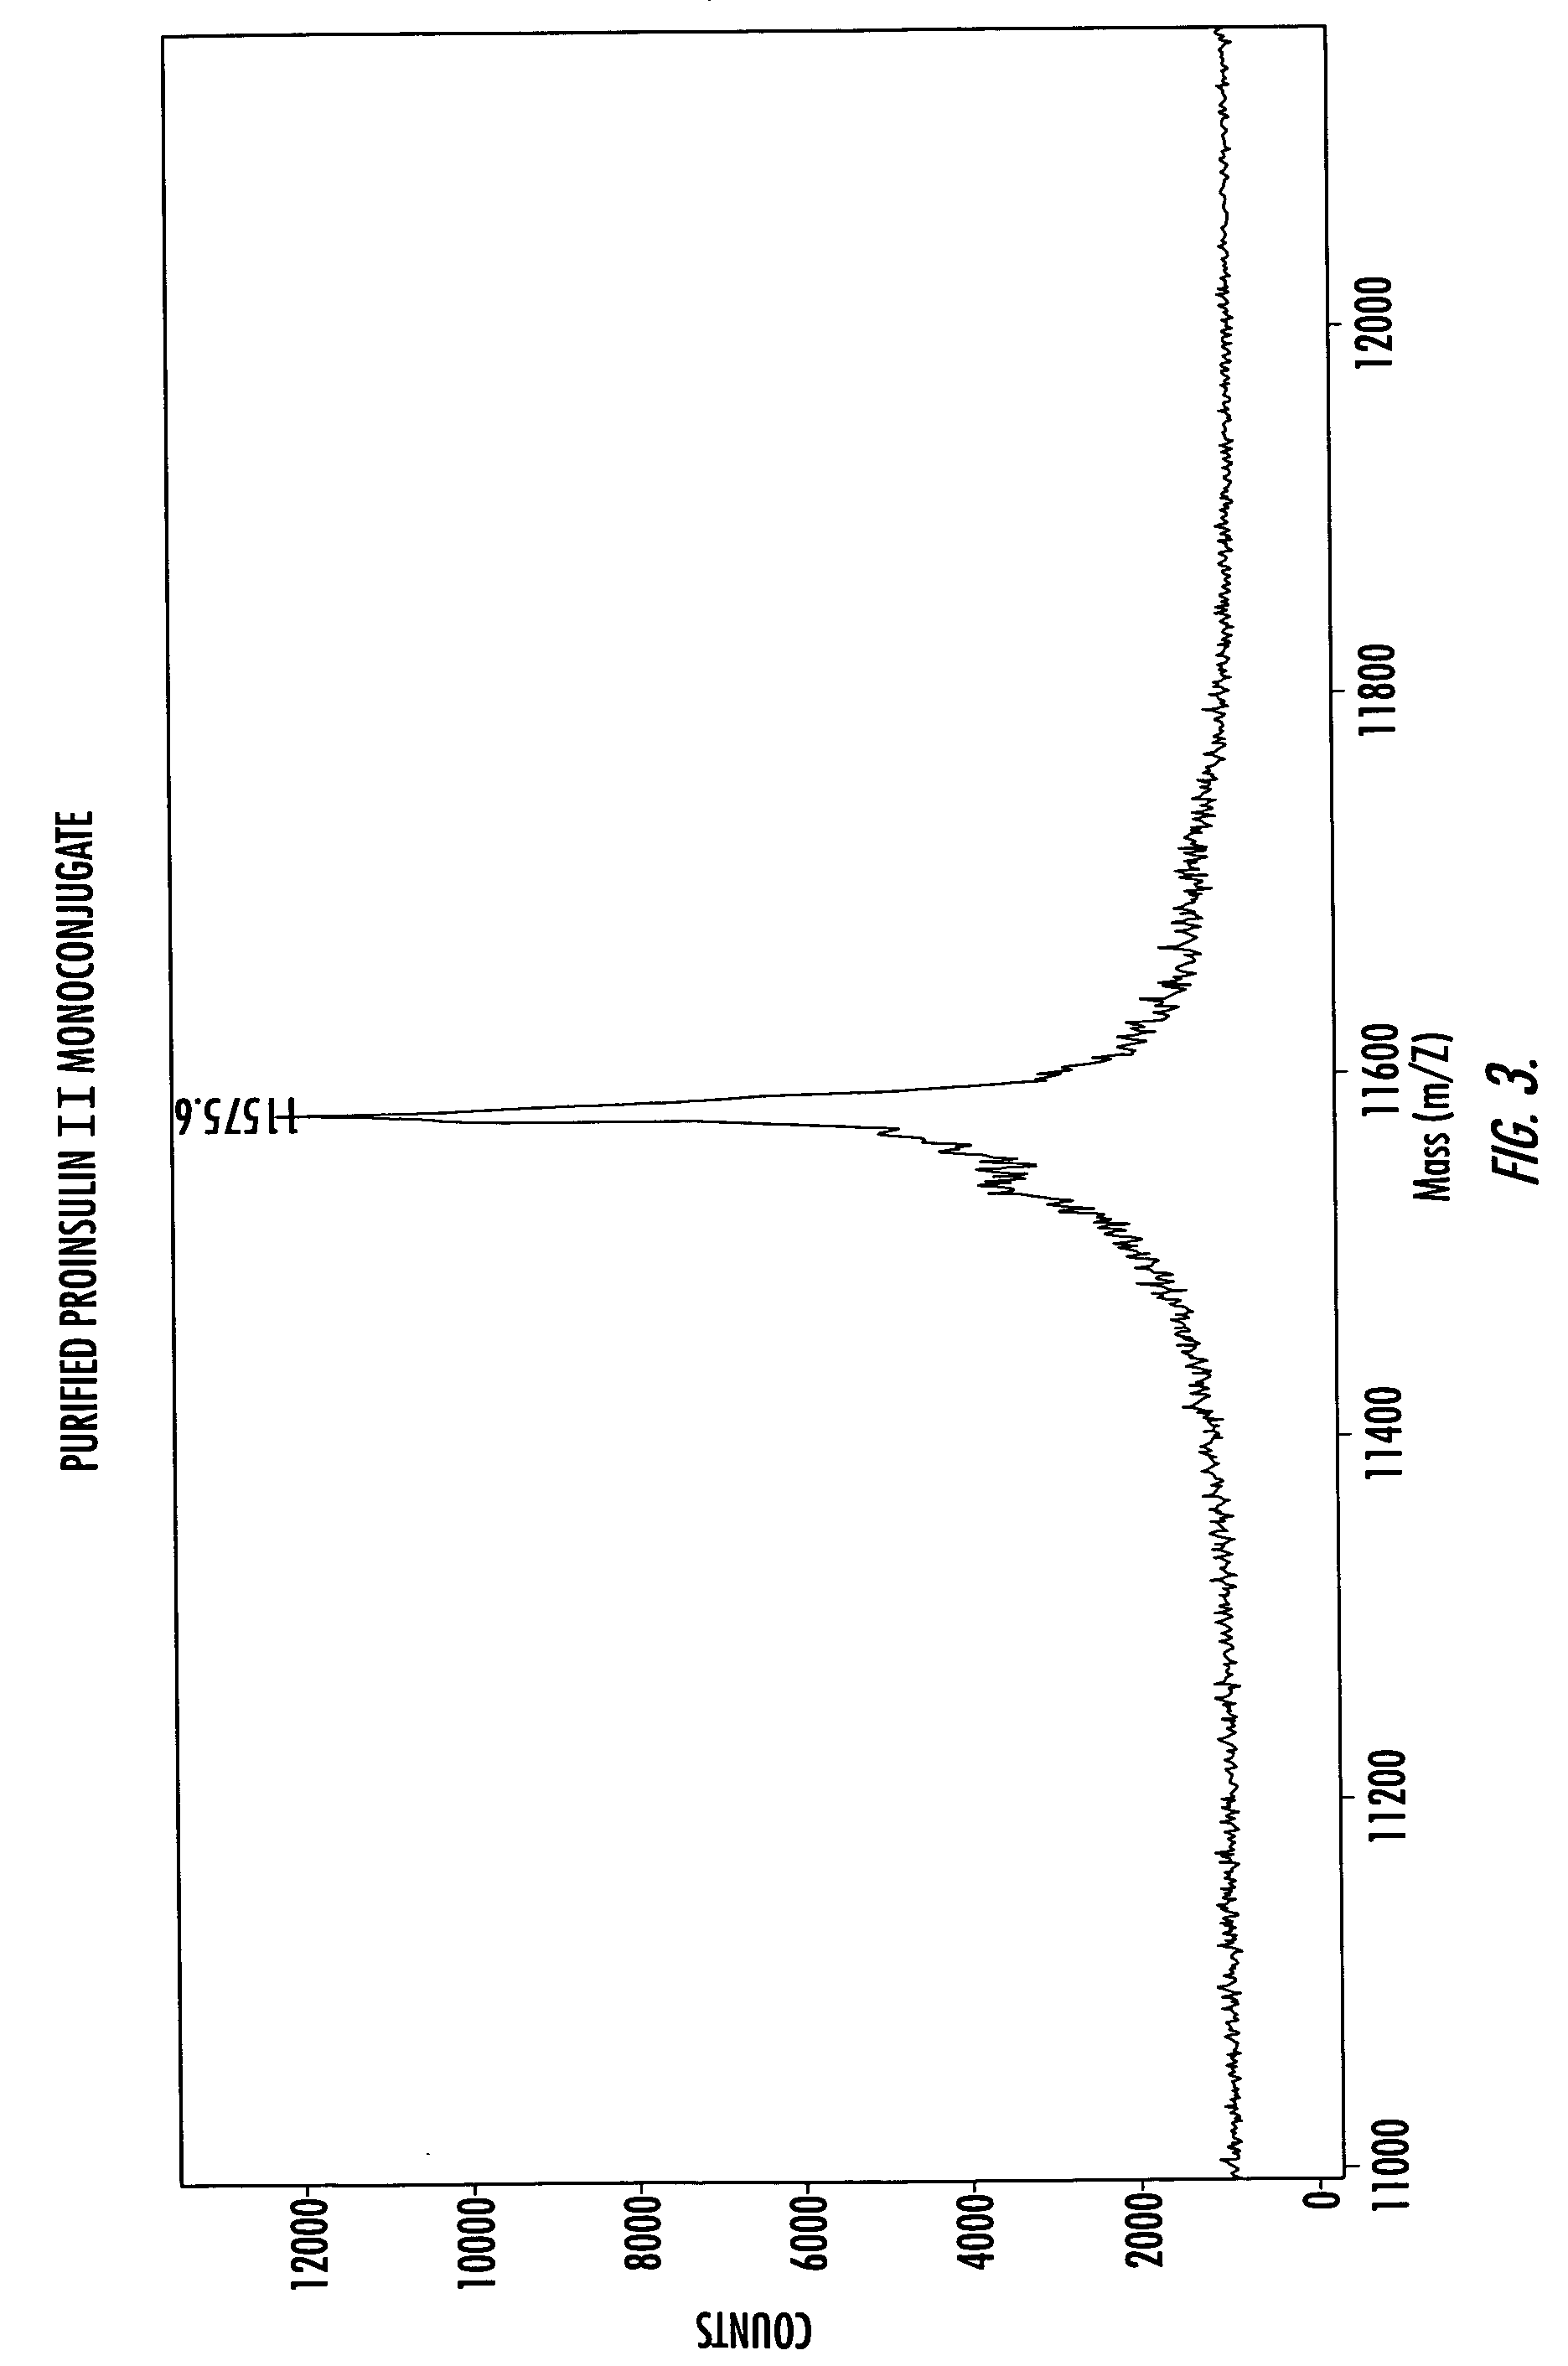 Methods of synthesizing insulin polypeptide-oligomer conjugates, and proinsulin polypeptide-oligomer conjugates and methods of synthesizing same